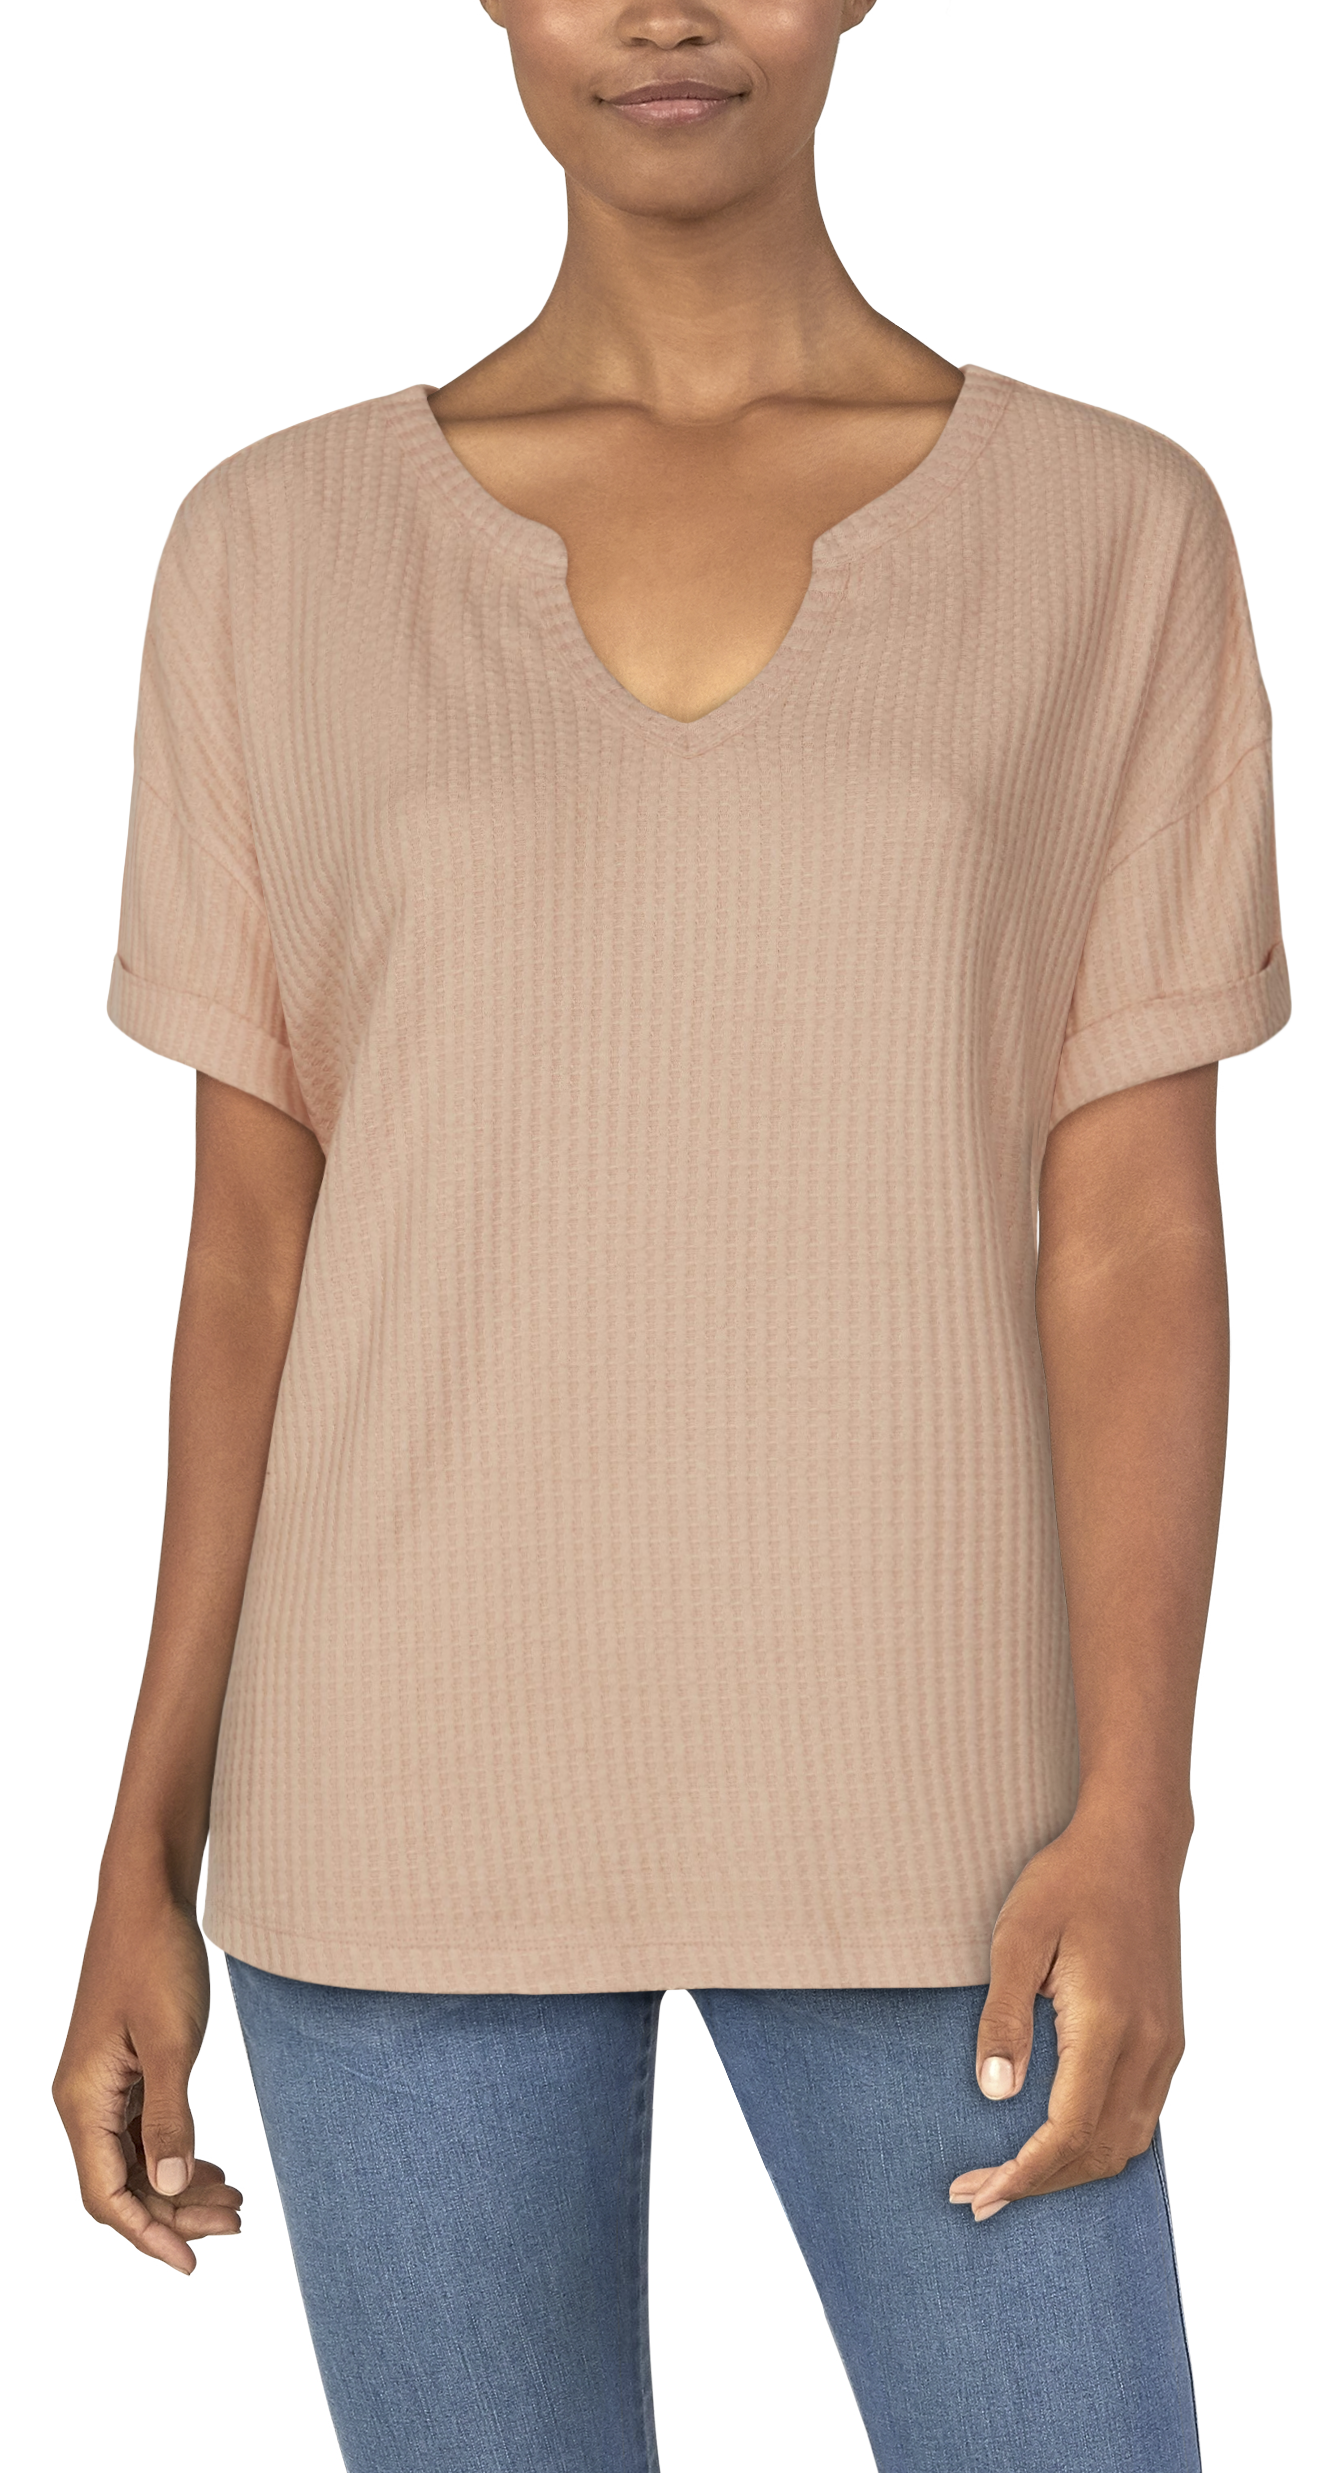 Natural Reflections Brush Creek Waffle Short-Sleeve Shirt for Ladies - Almost Apricot - M